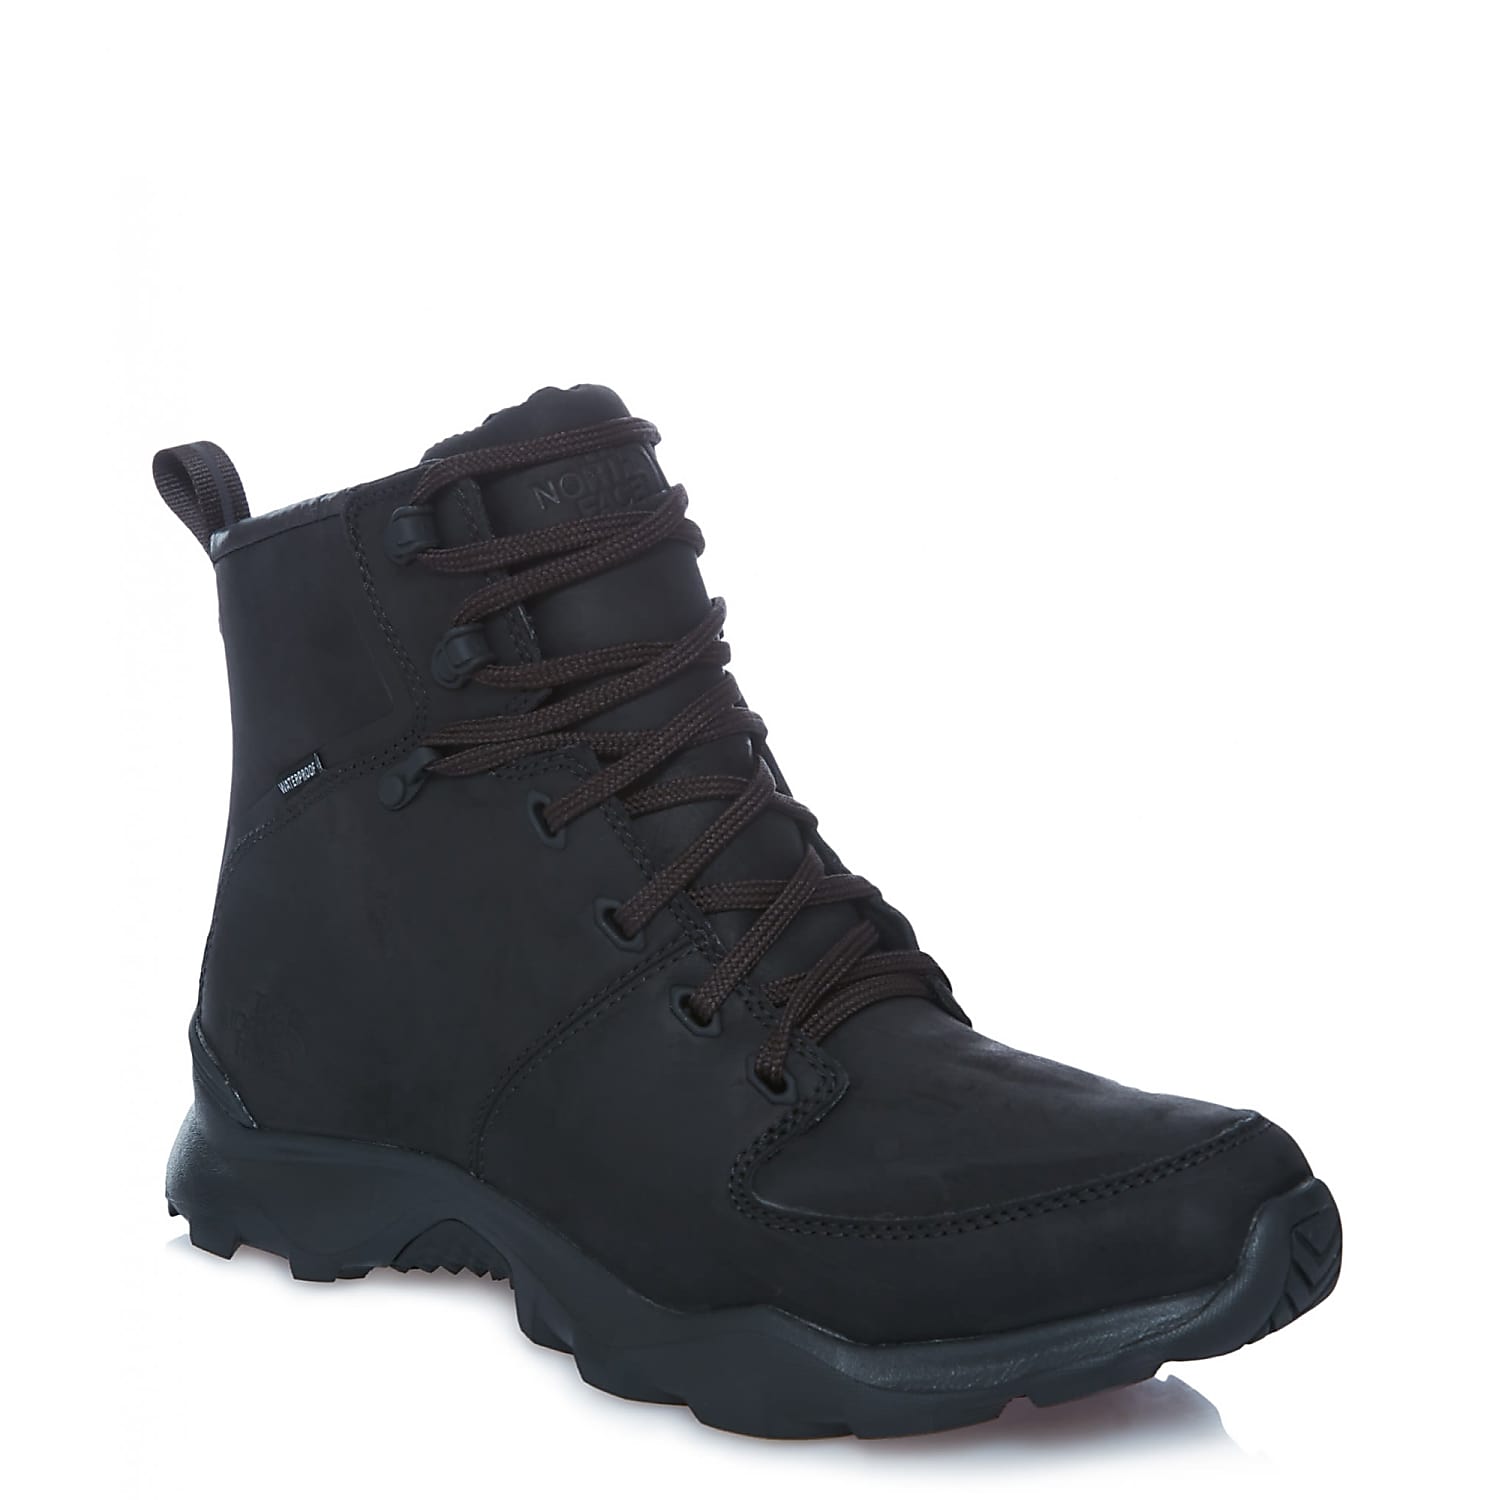 the north face men's thermoball versa waterproof winter boots